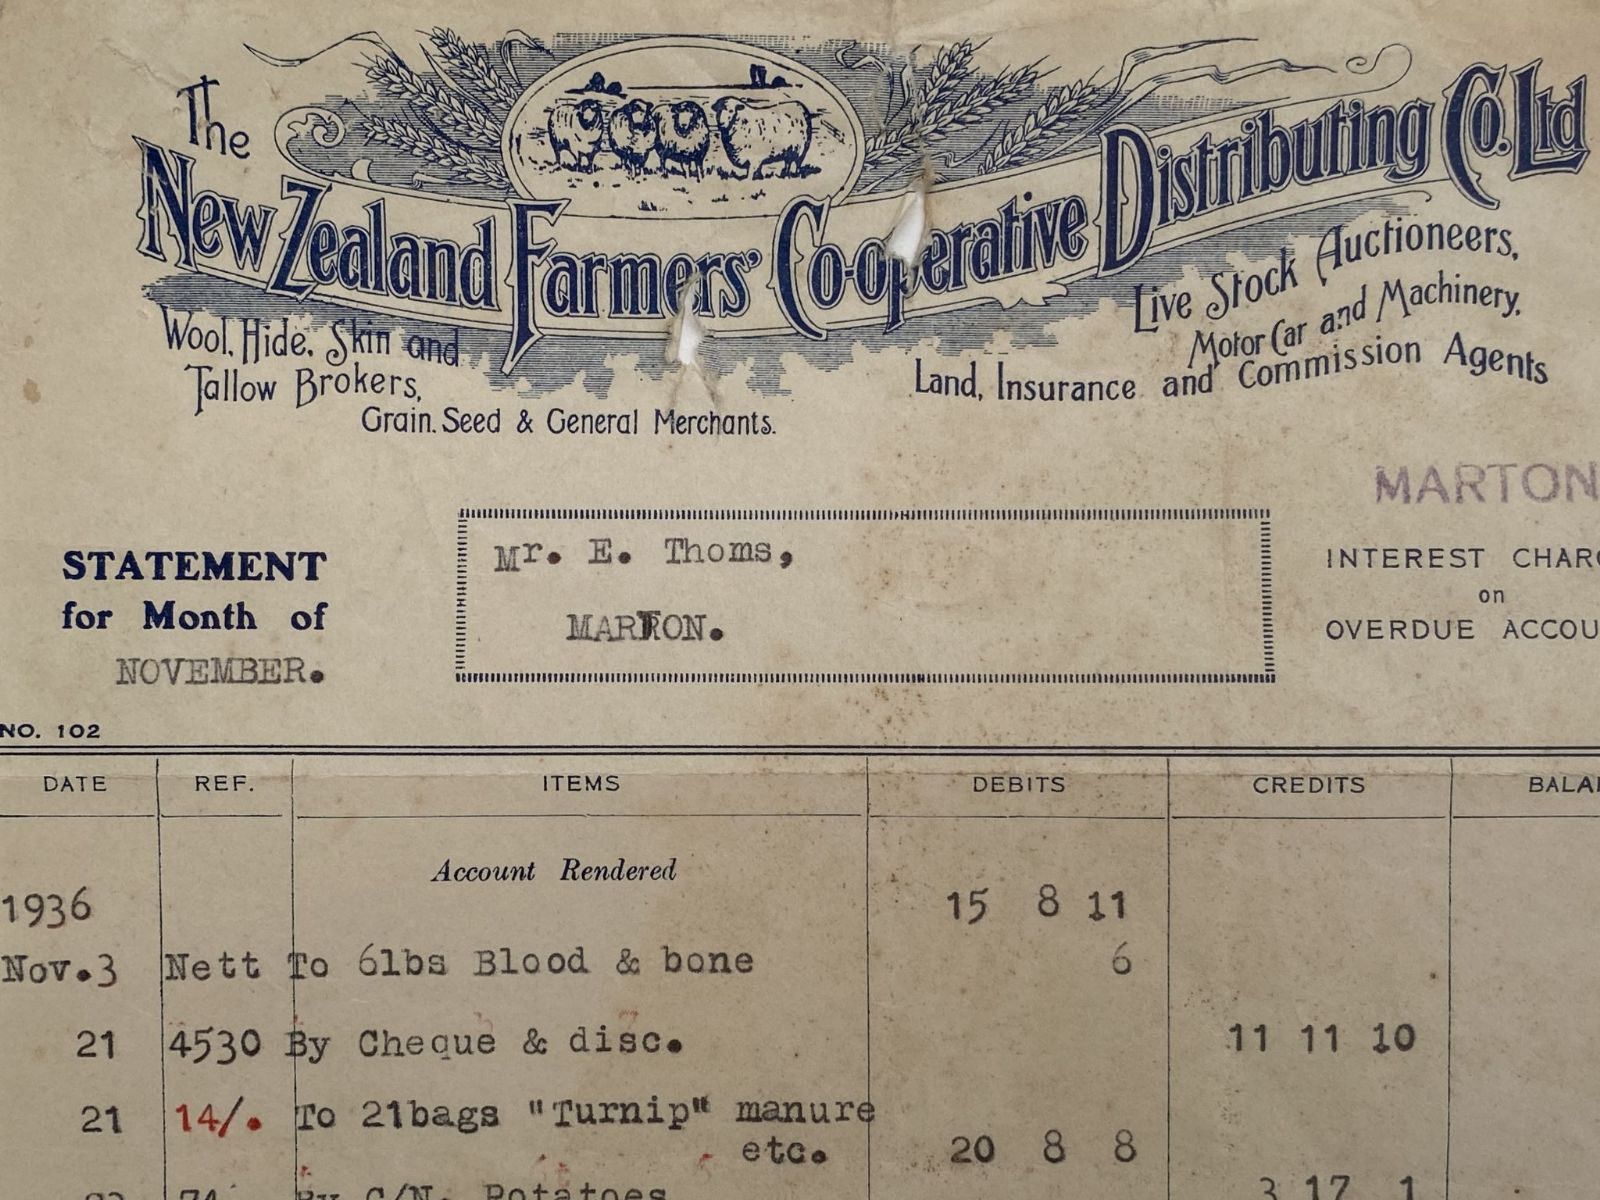 OLD INVOICE / RECEIPT: The NZ Farmers Co-operative Distributing Co. Ltd. 1936